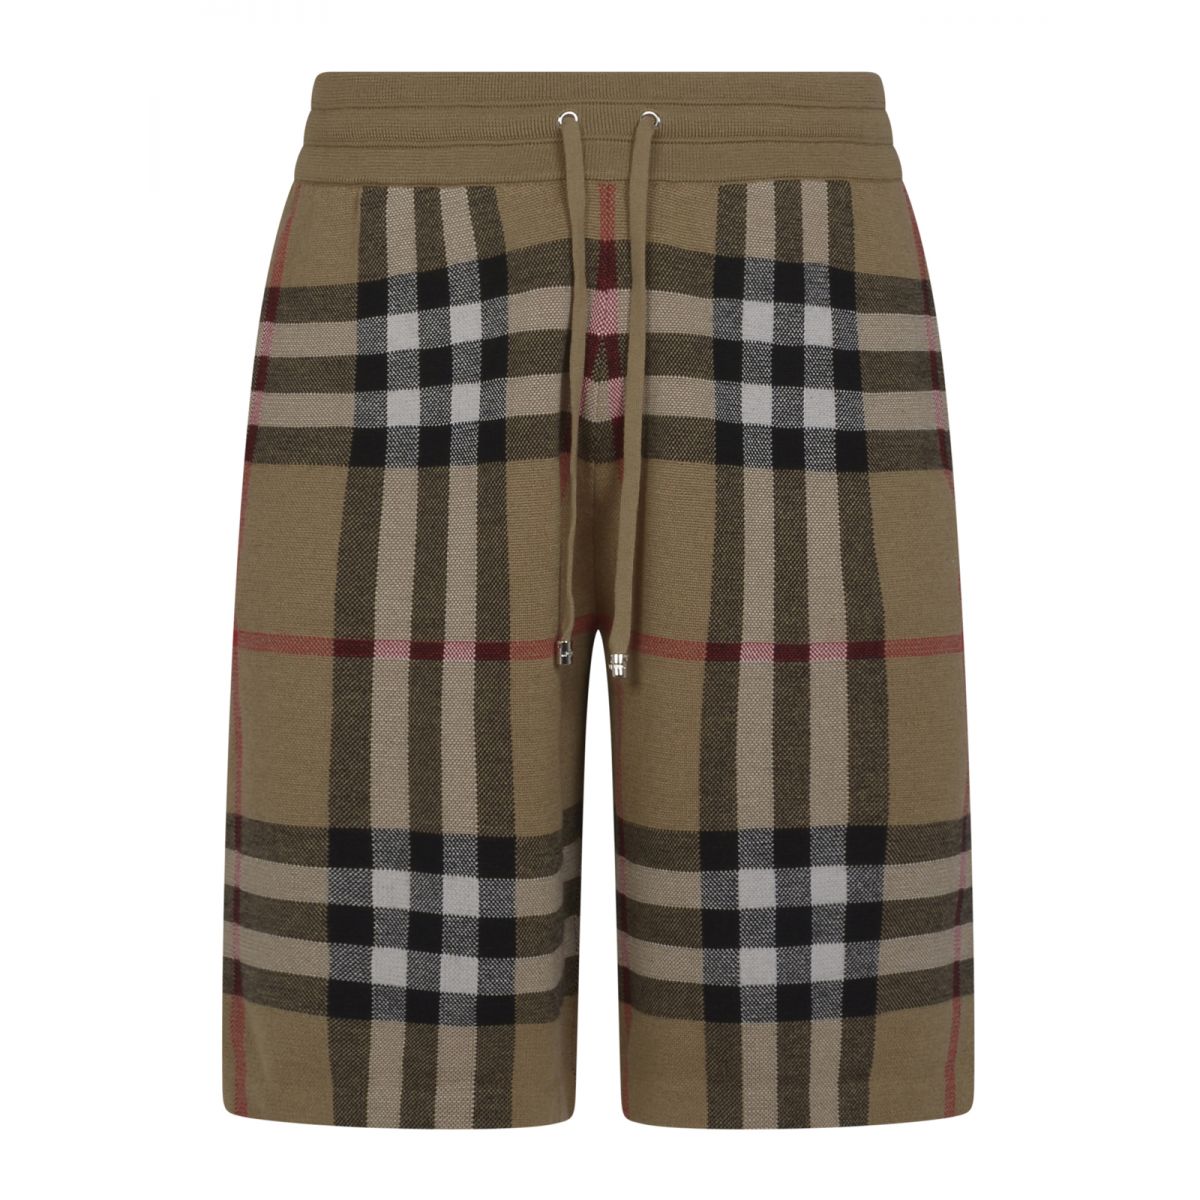 BURBERRY - Silk and wool shorts with a jacquard check pattern